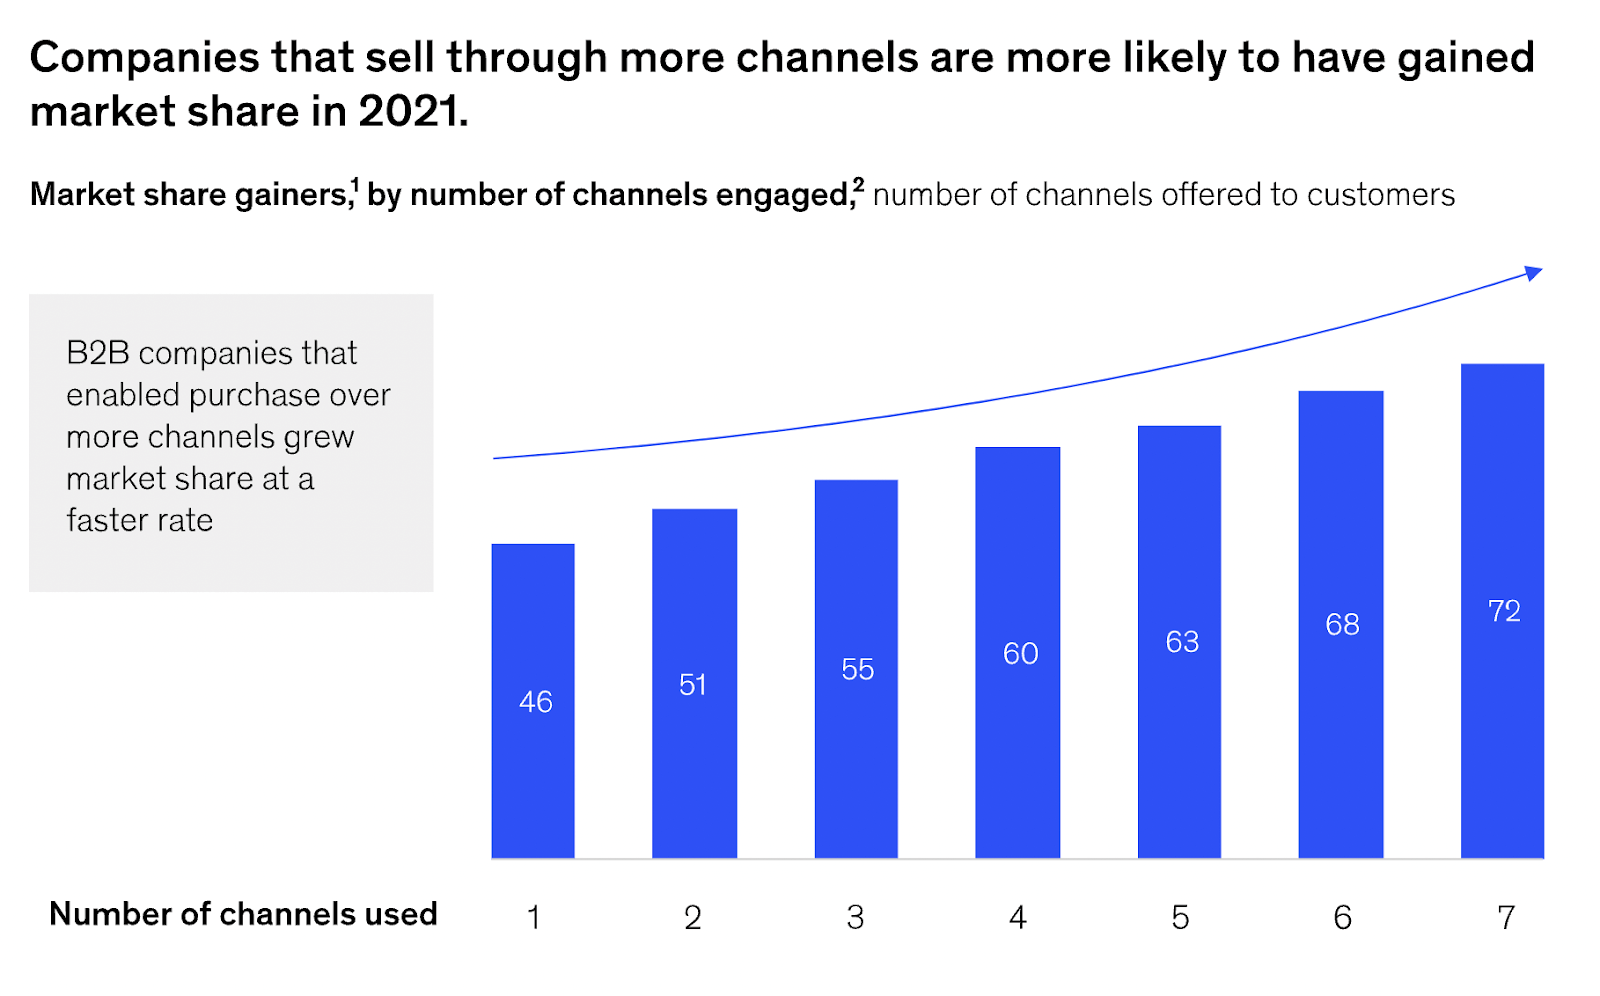 Companies that use more channels have a competitive advantage